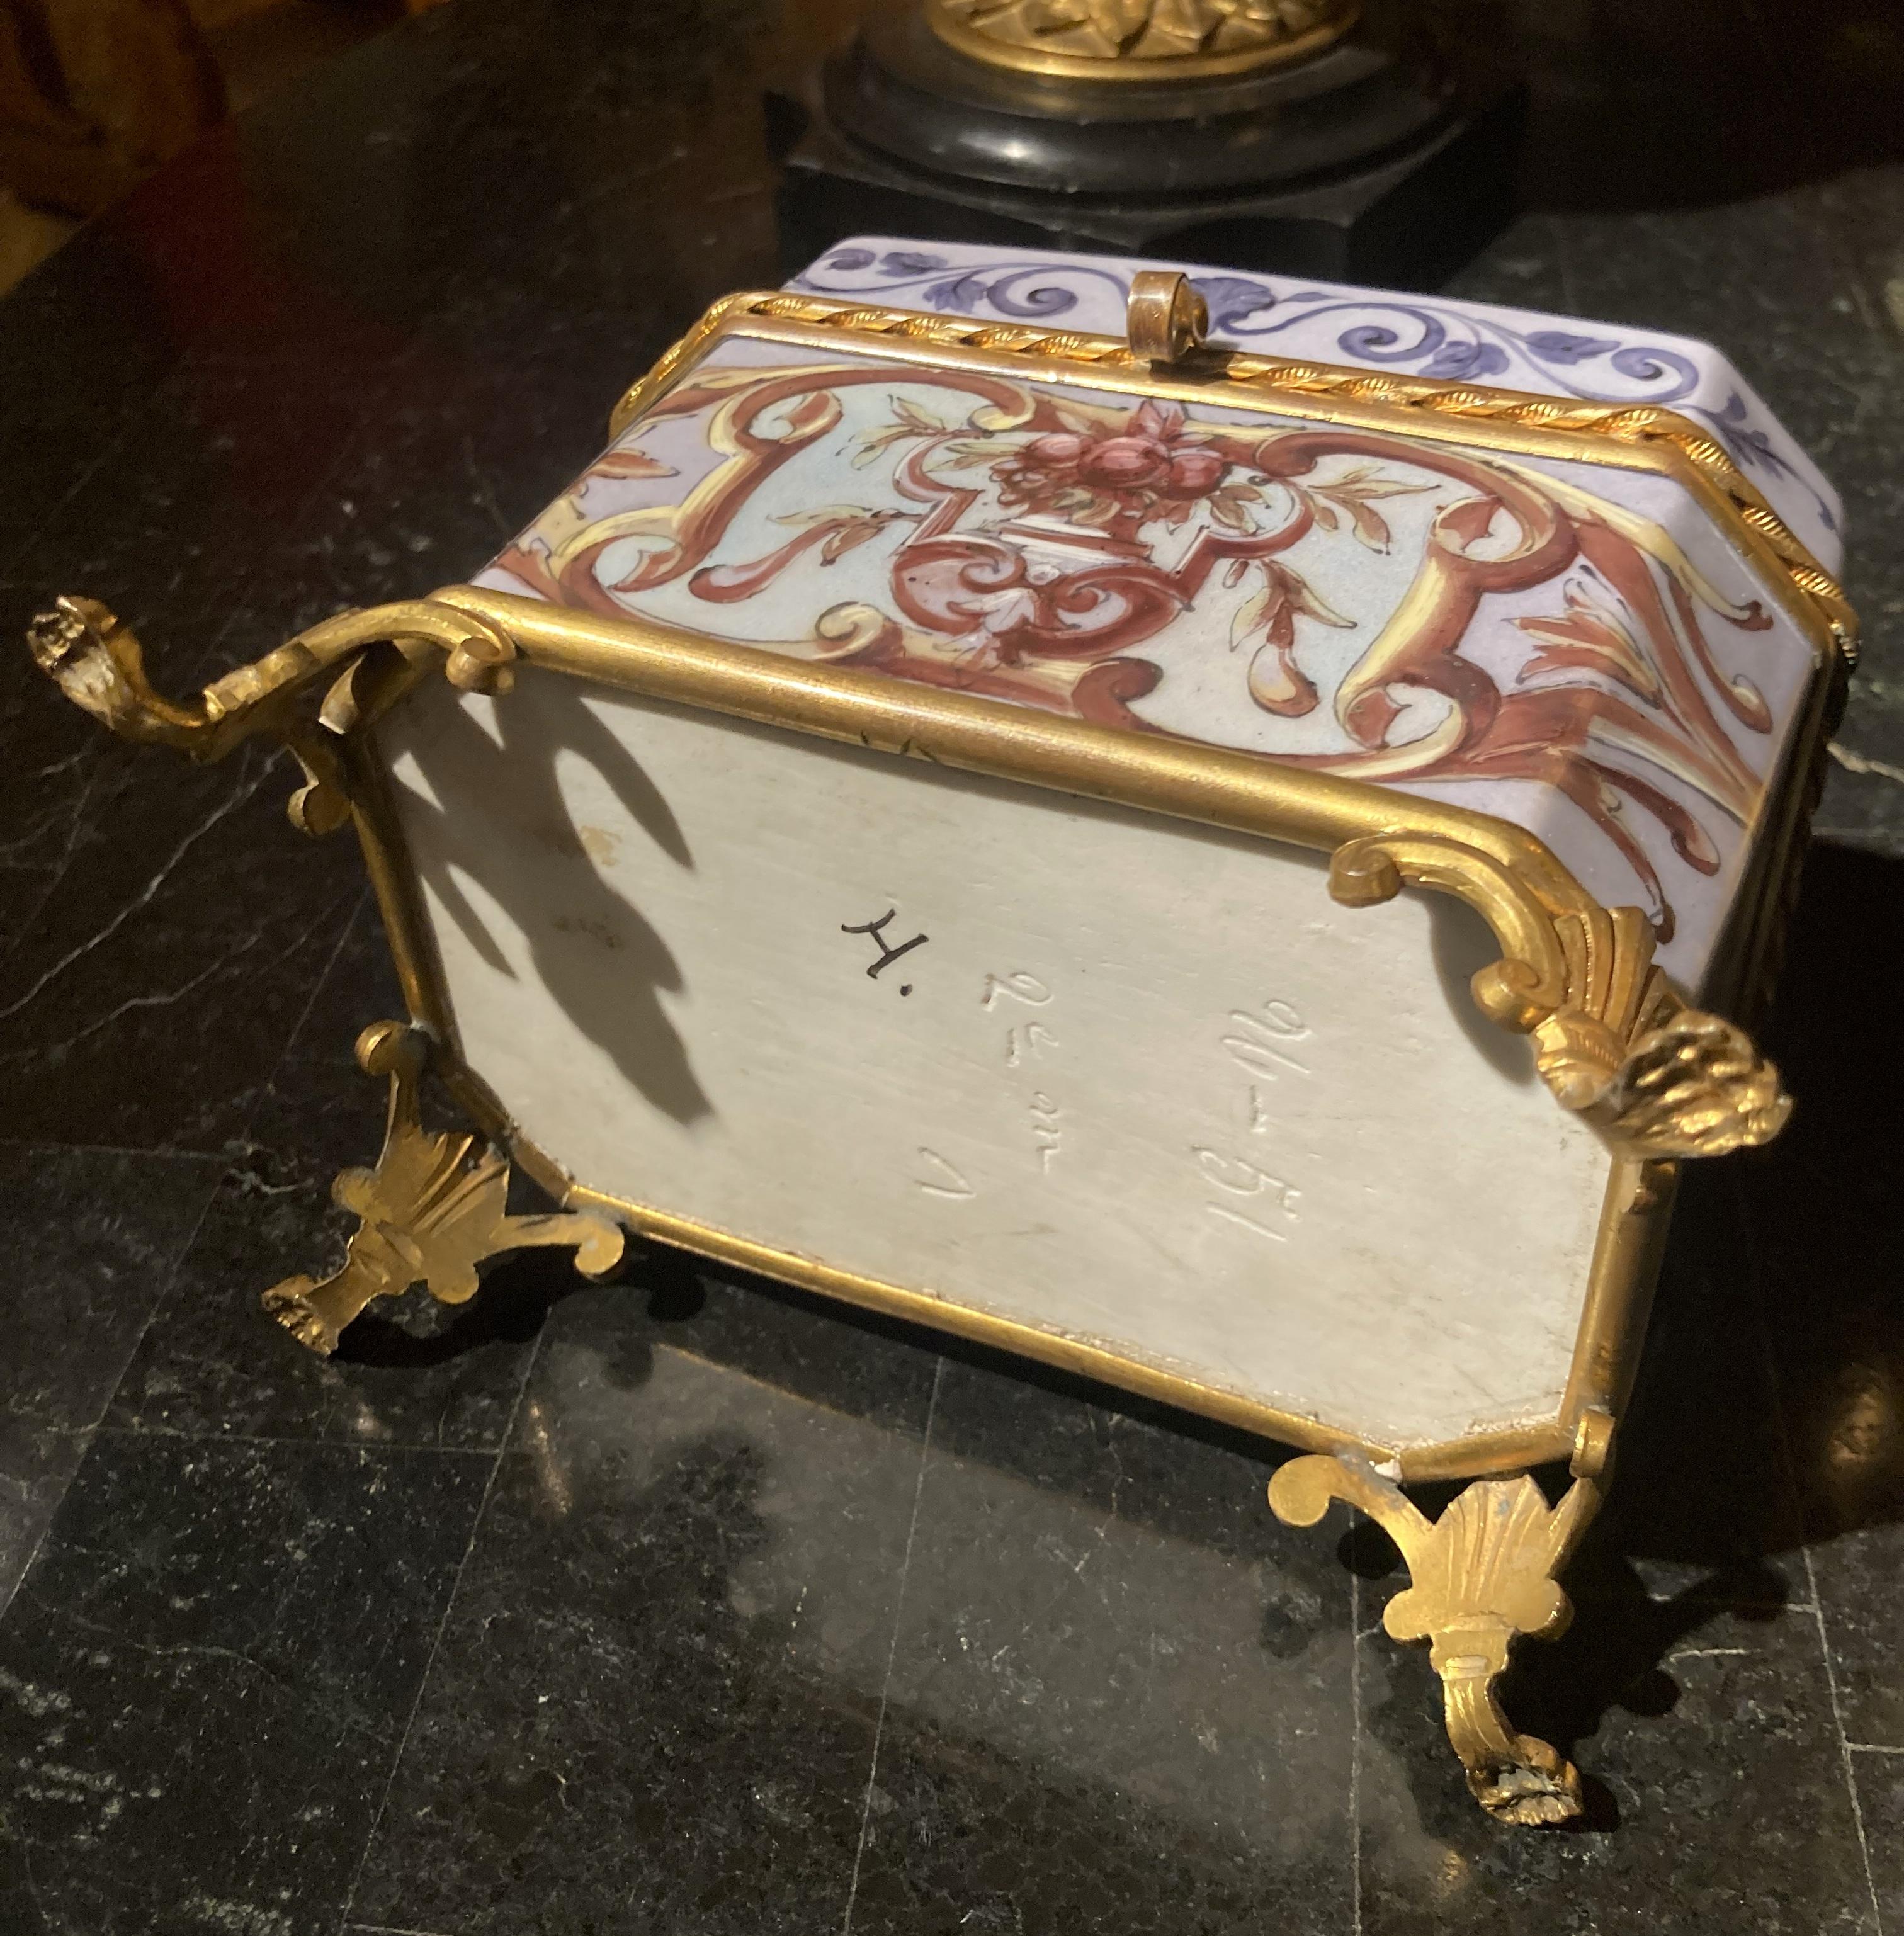 French 19th Century Empire Porcelain and Gilt Bronze Decorative Jewelry Box For Sale 10